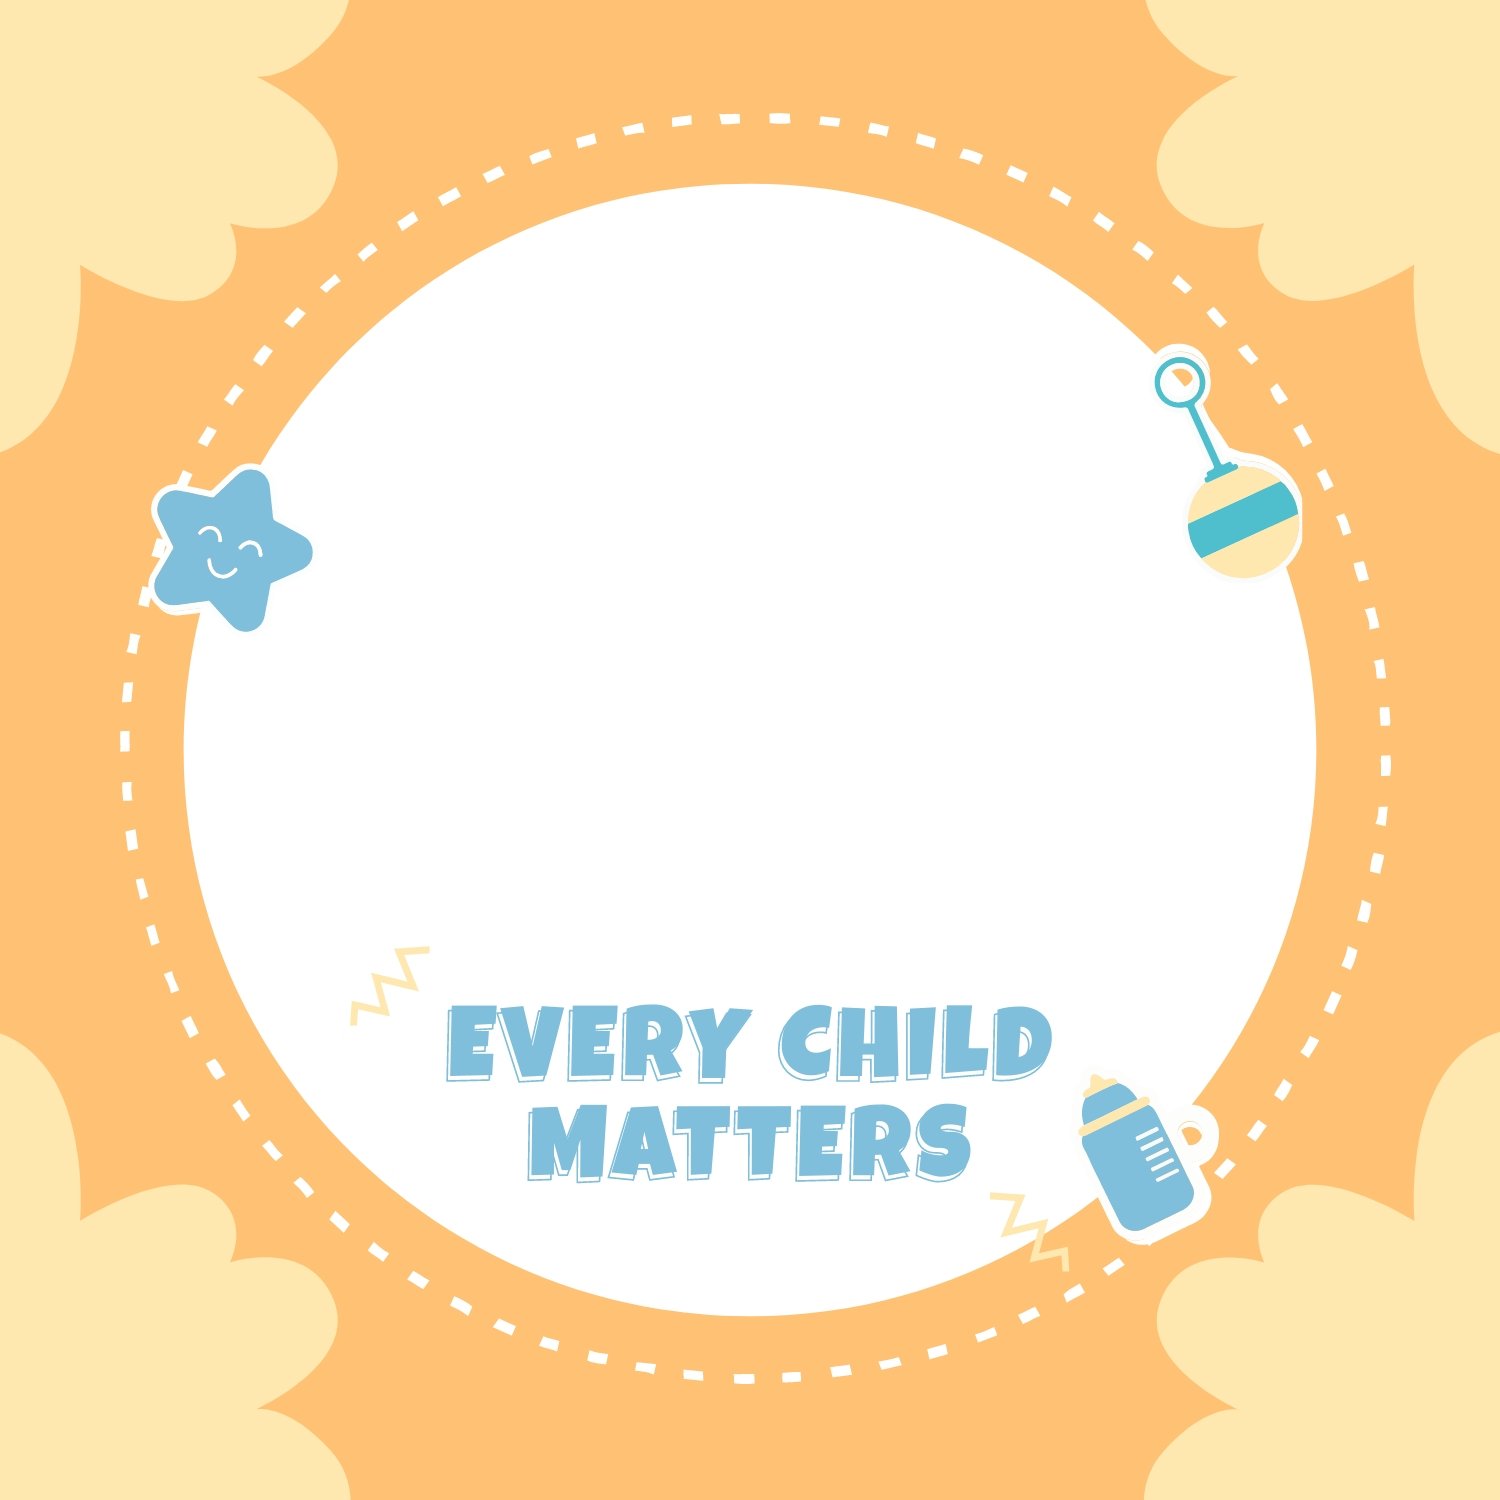 Every Child Matters Facebook Profile Frame Template